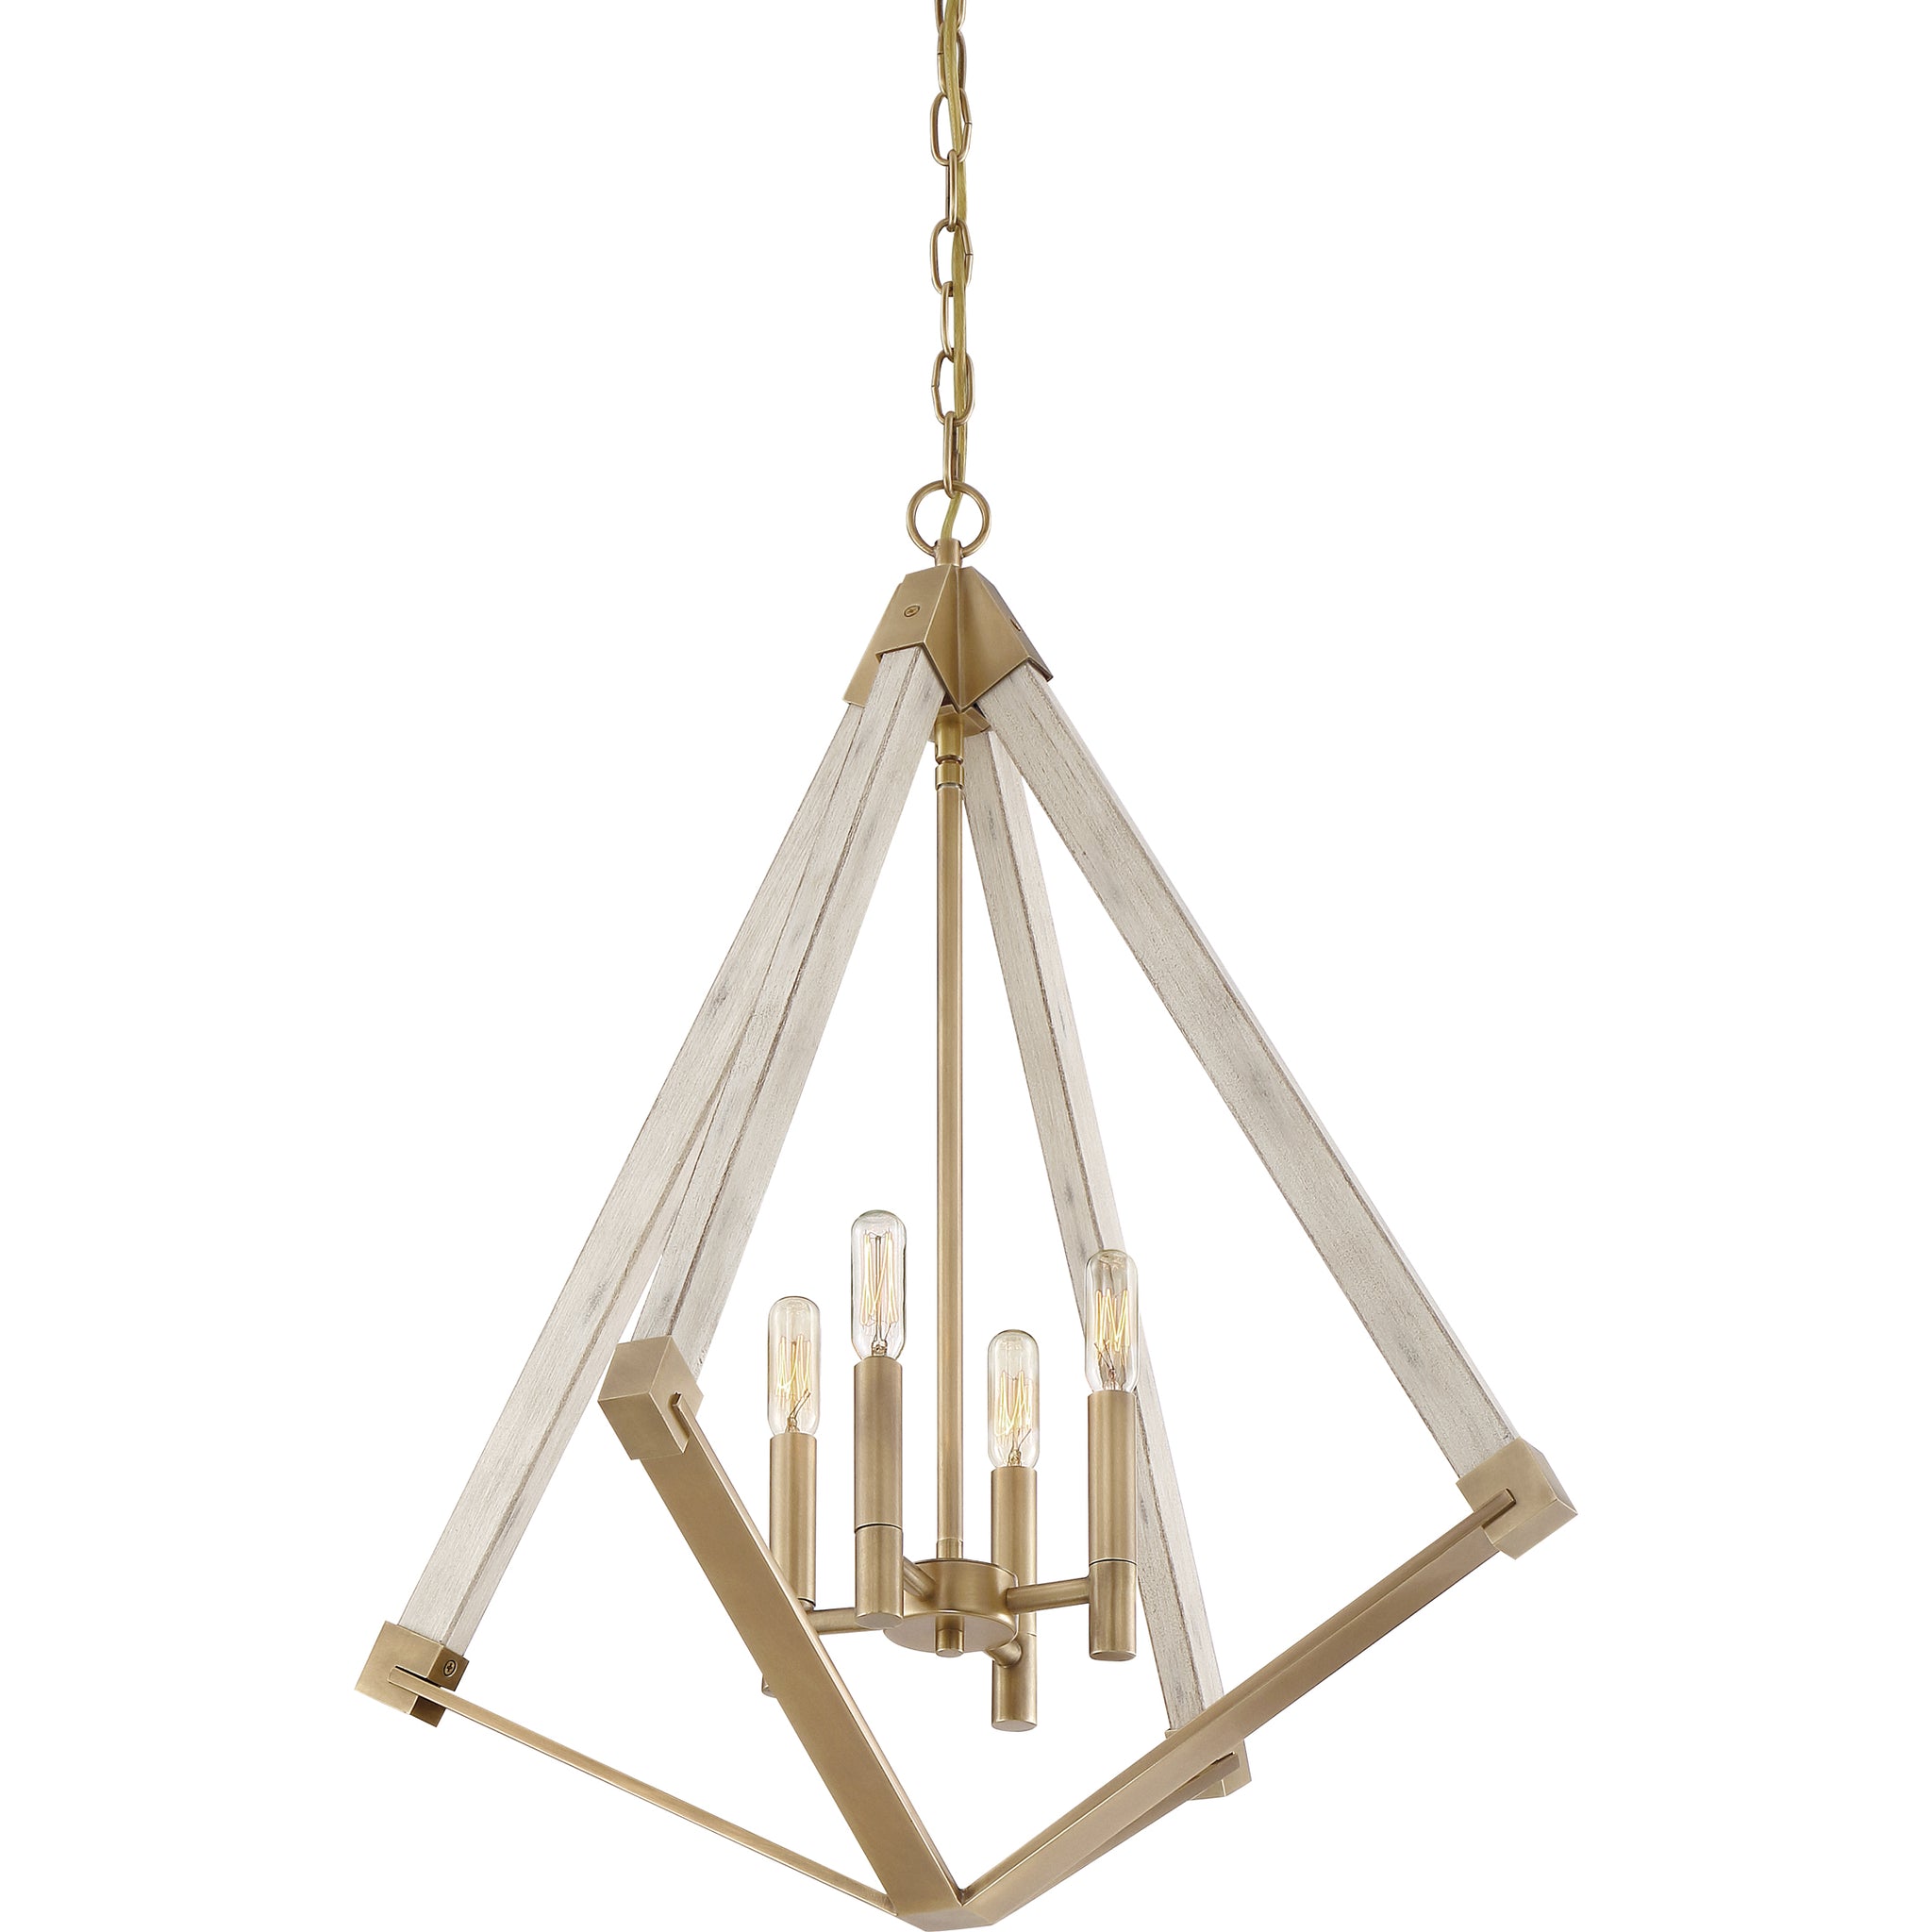 Viewpoint Pendant Weathered Brass